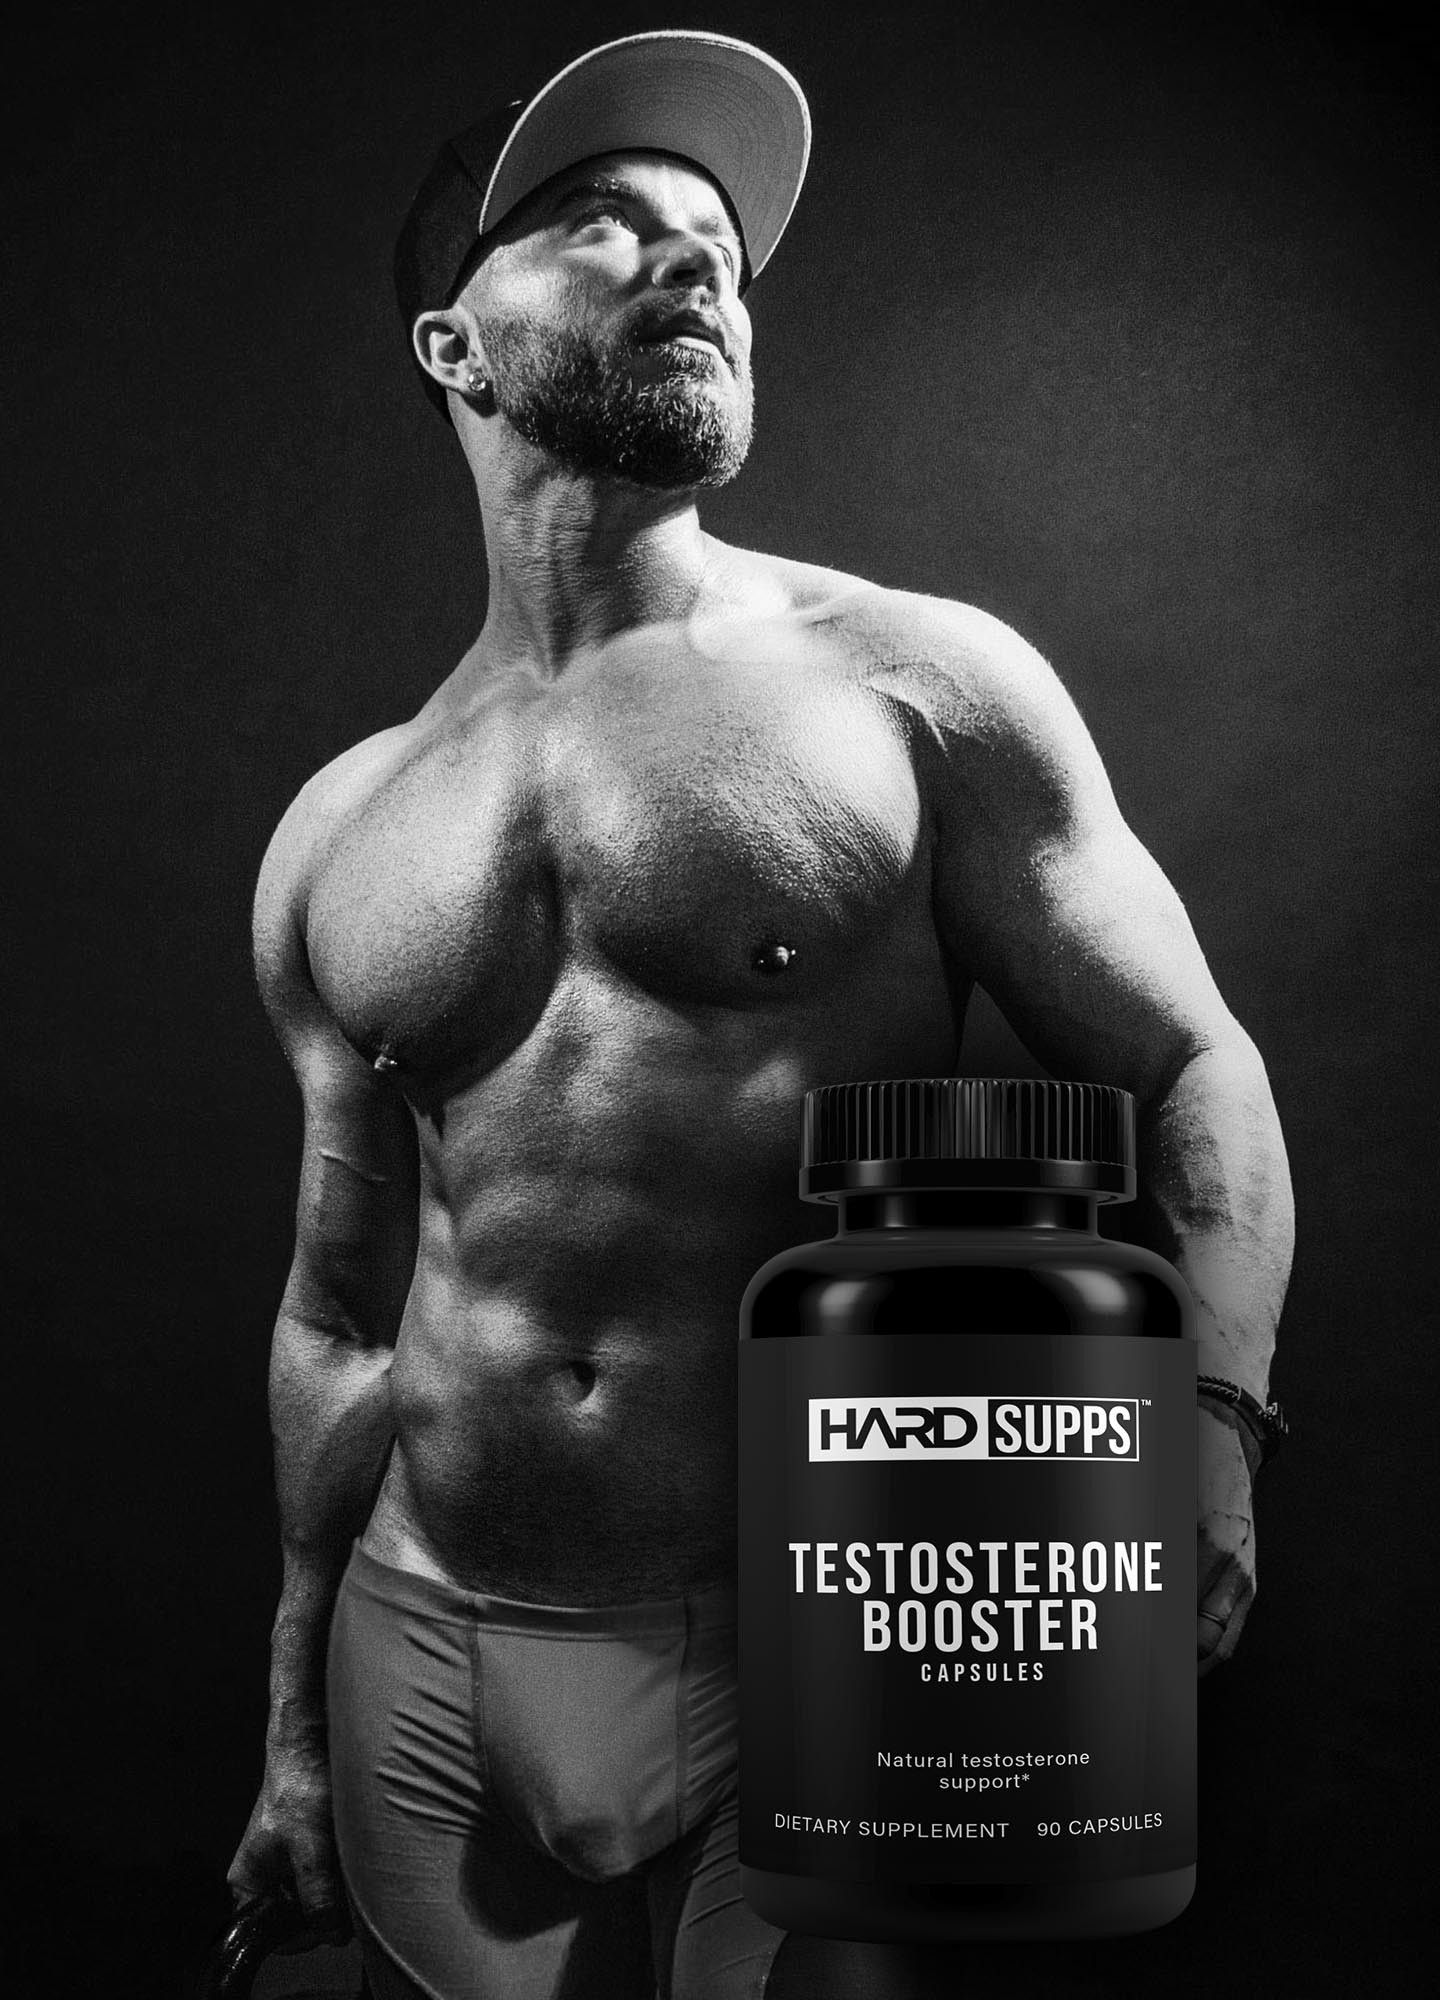 PUMP IT UP: Boost Your Testosterone and Unleash Your Inner Stud – by Maxwell Alexander, Fitness Model, Certified Fitness Trainer, Certified Bodybuilding, and Sports Nutrition Coach – Presented by HARD SUPPS